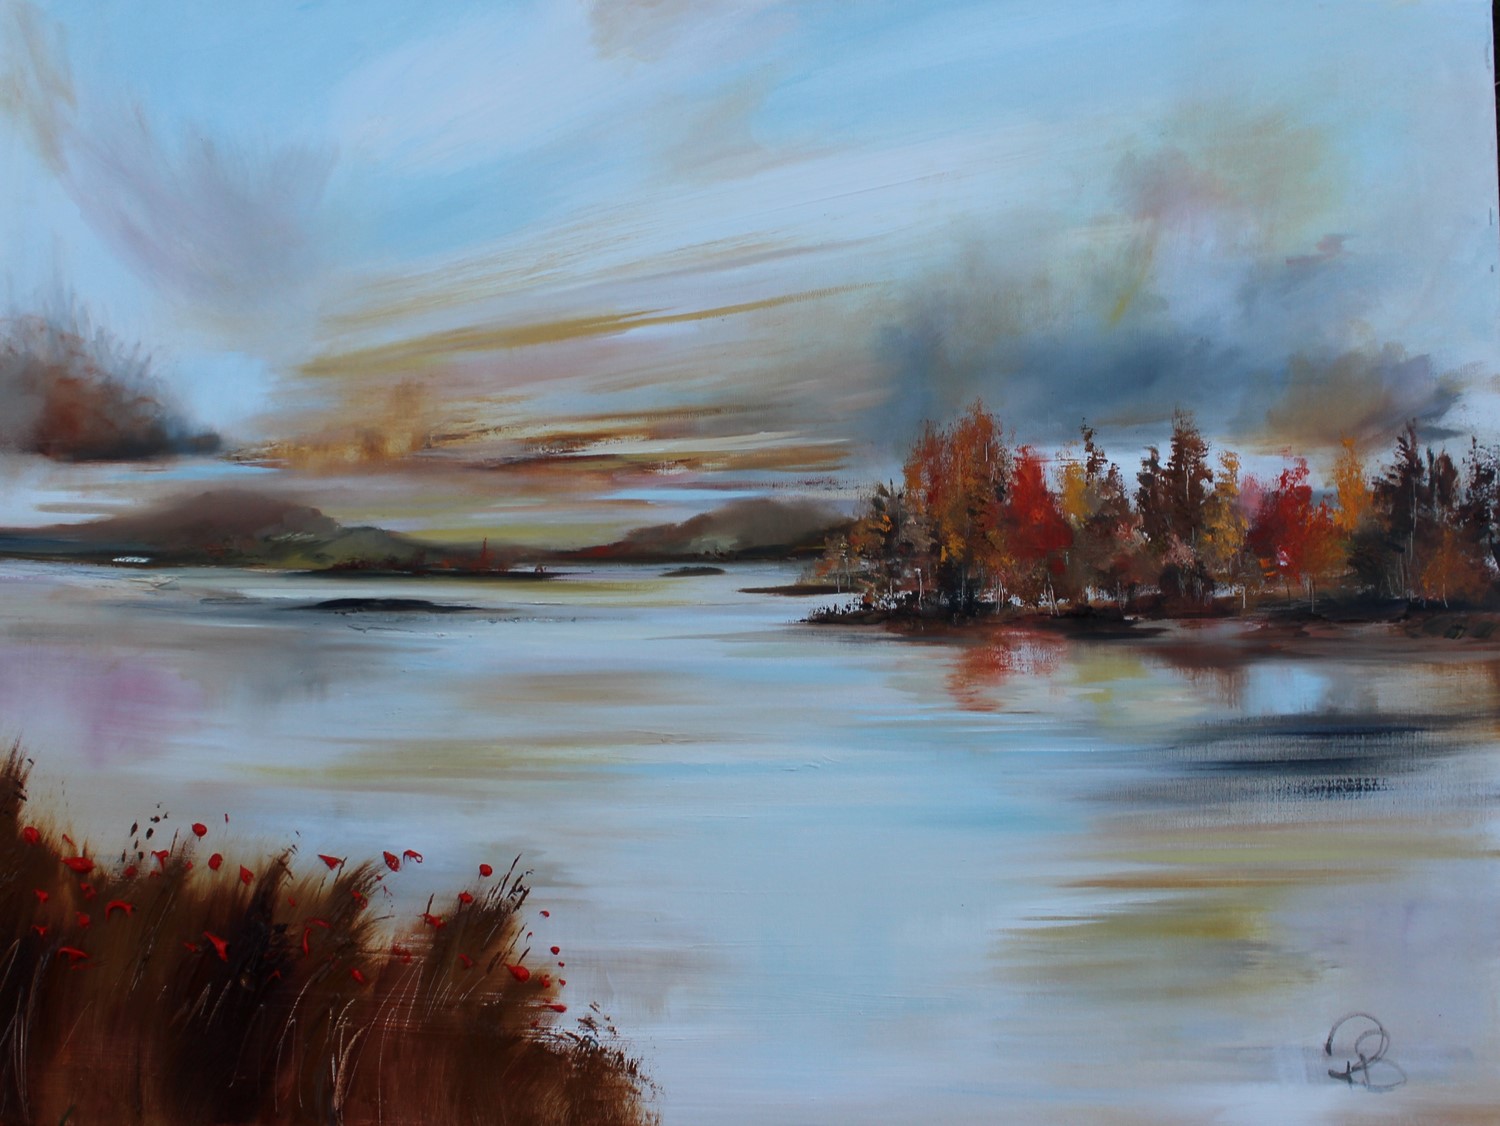 'By the side of the Loch in Autumn ' by artist Rosanne Barr